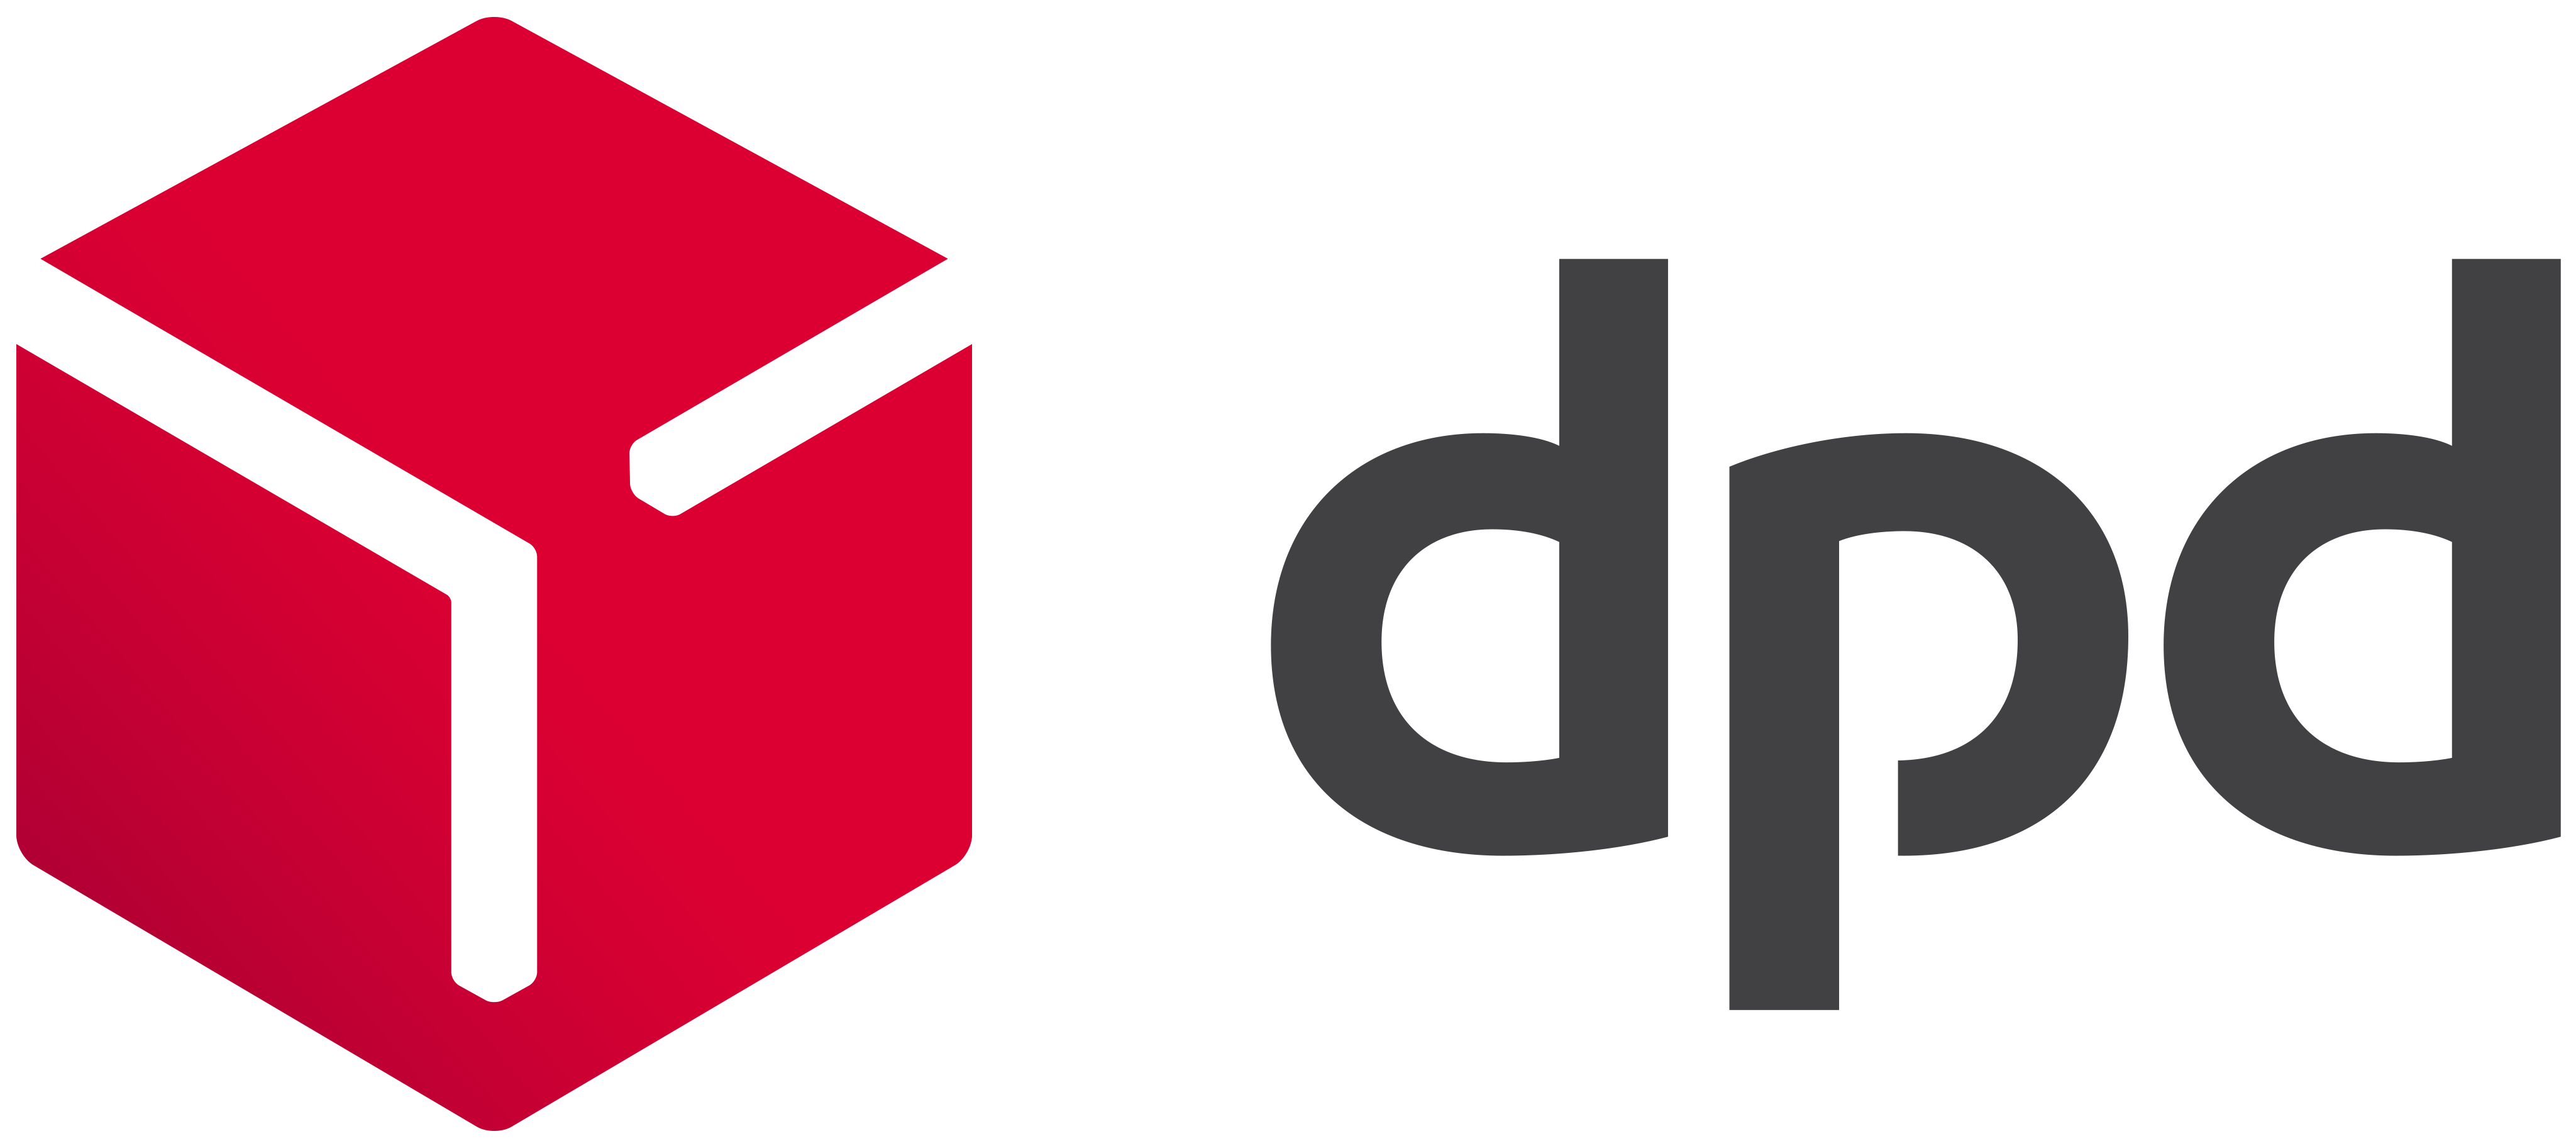 DPD_logo(red)2015.png